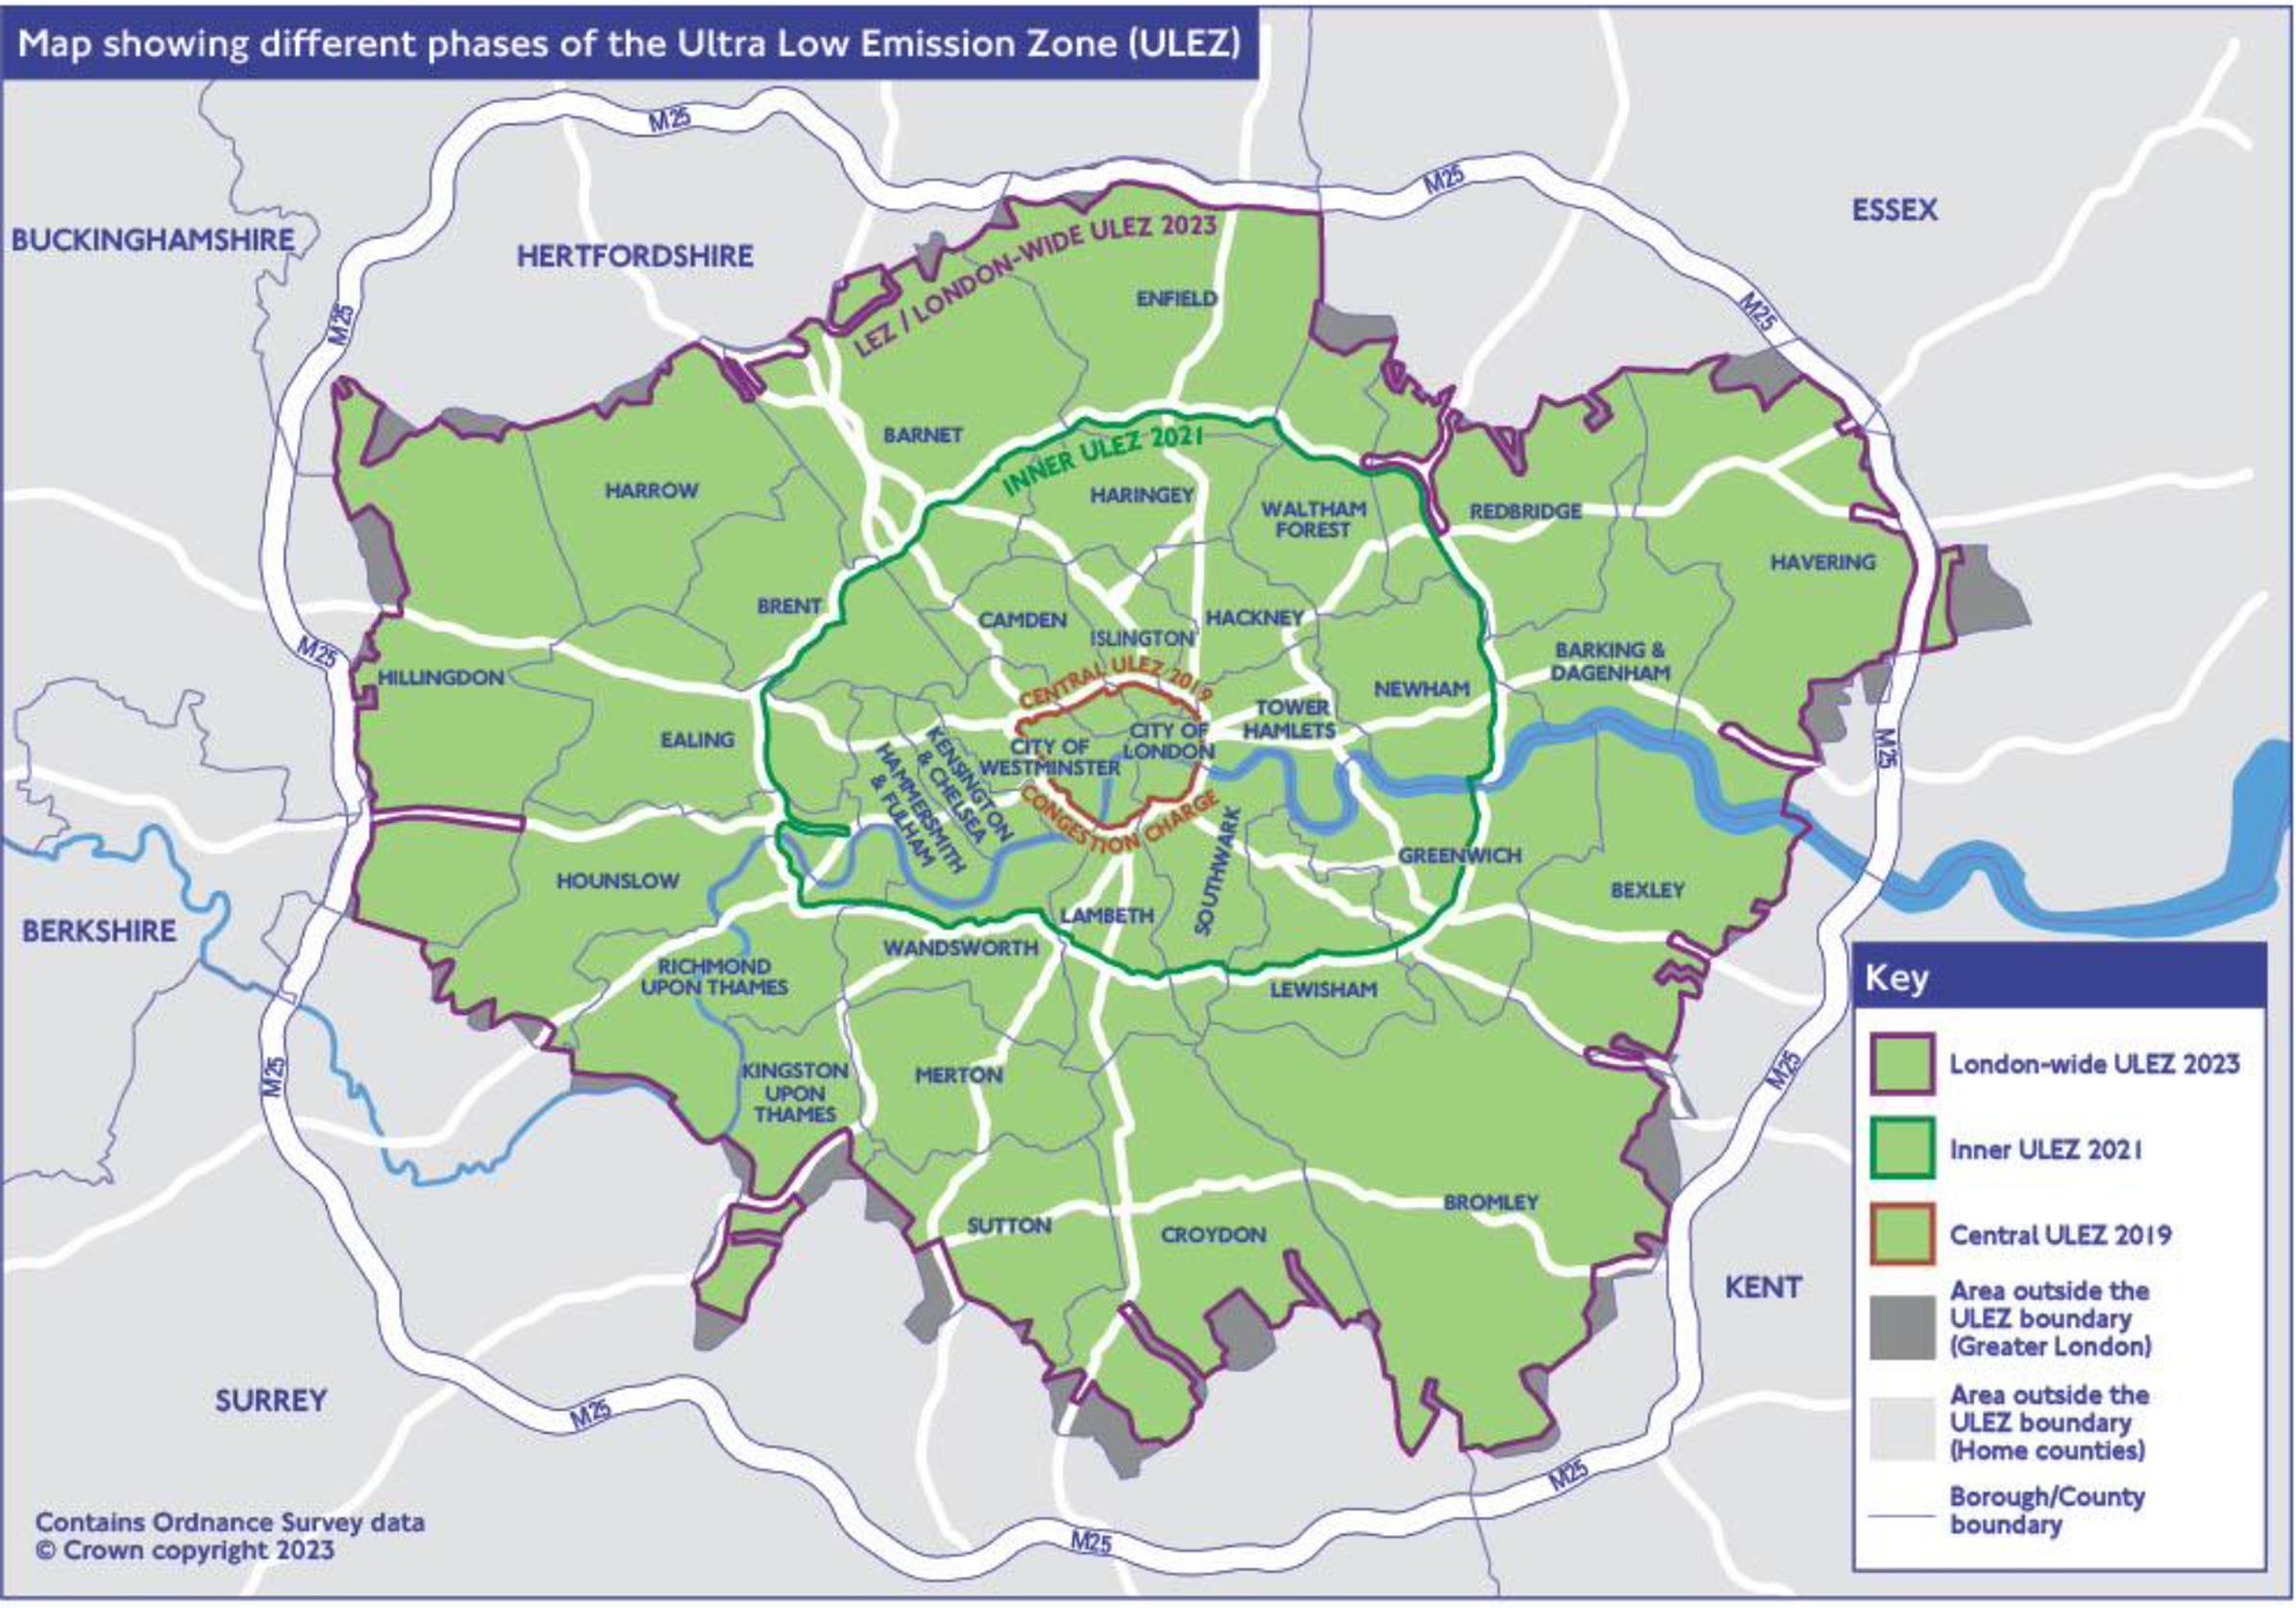 ULEZ expansion: One month on